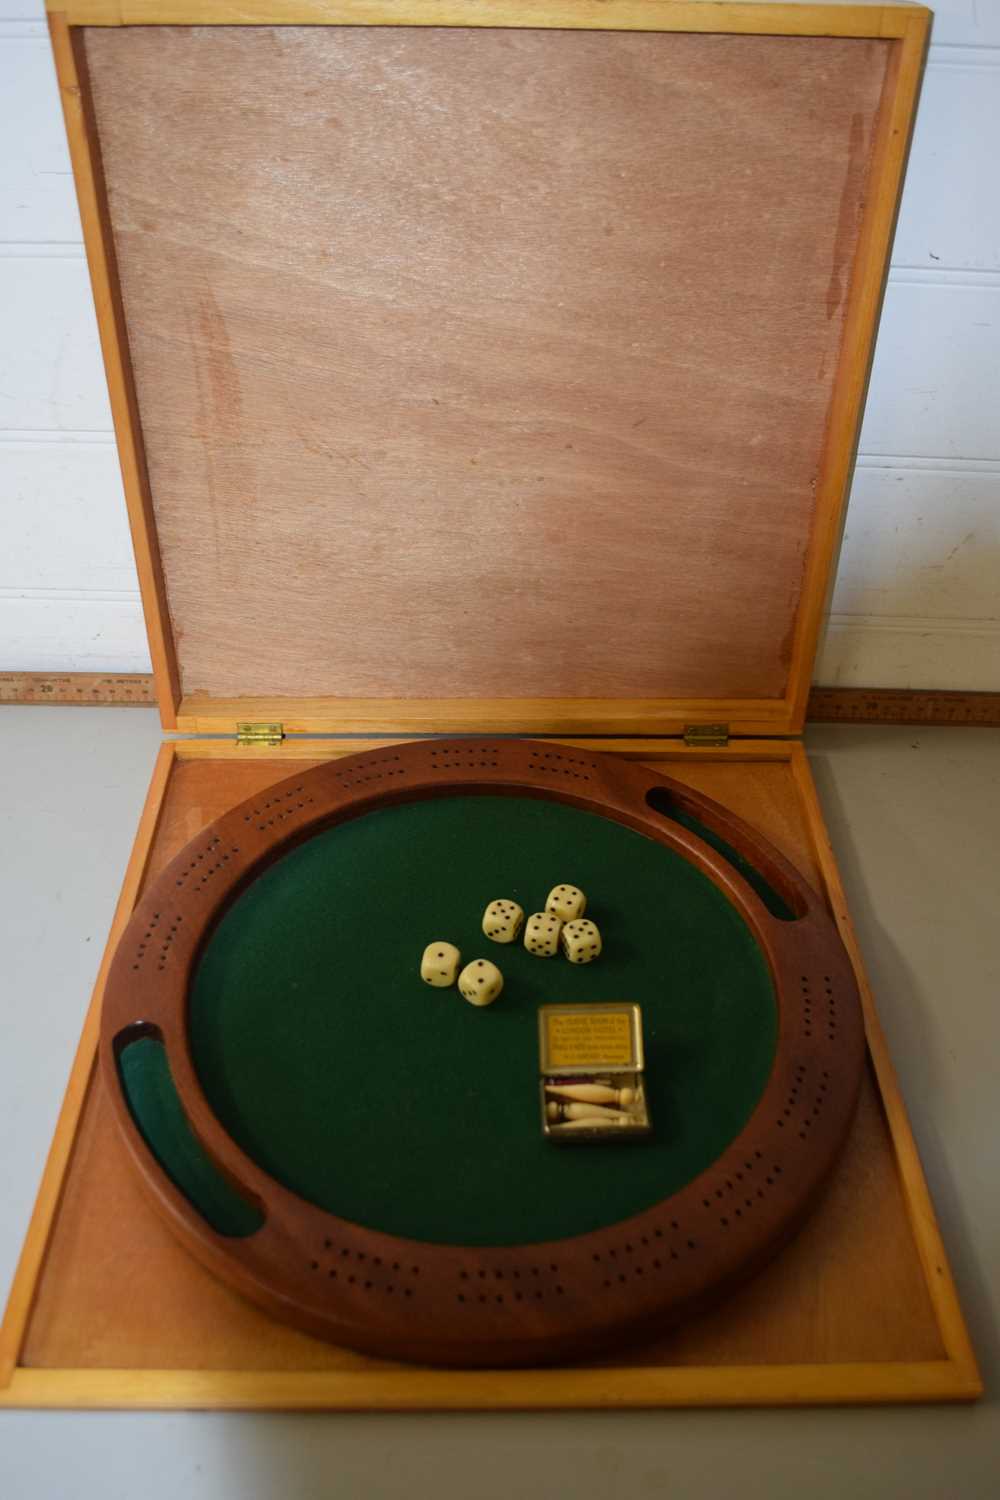 Boxed backgammon type board with dice